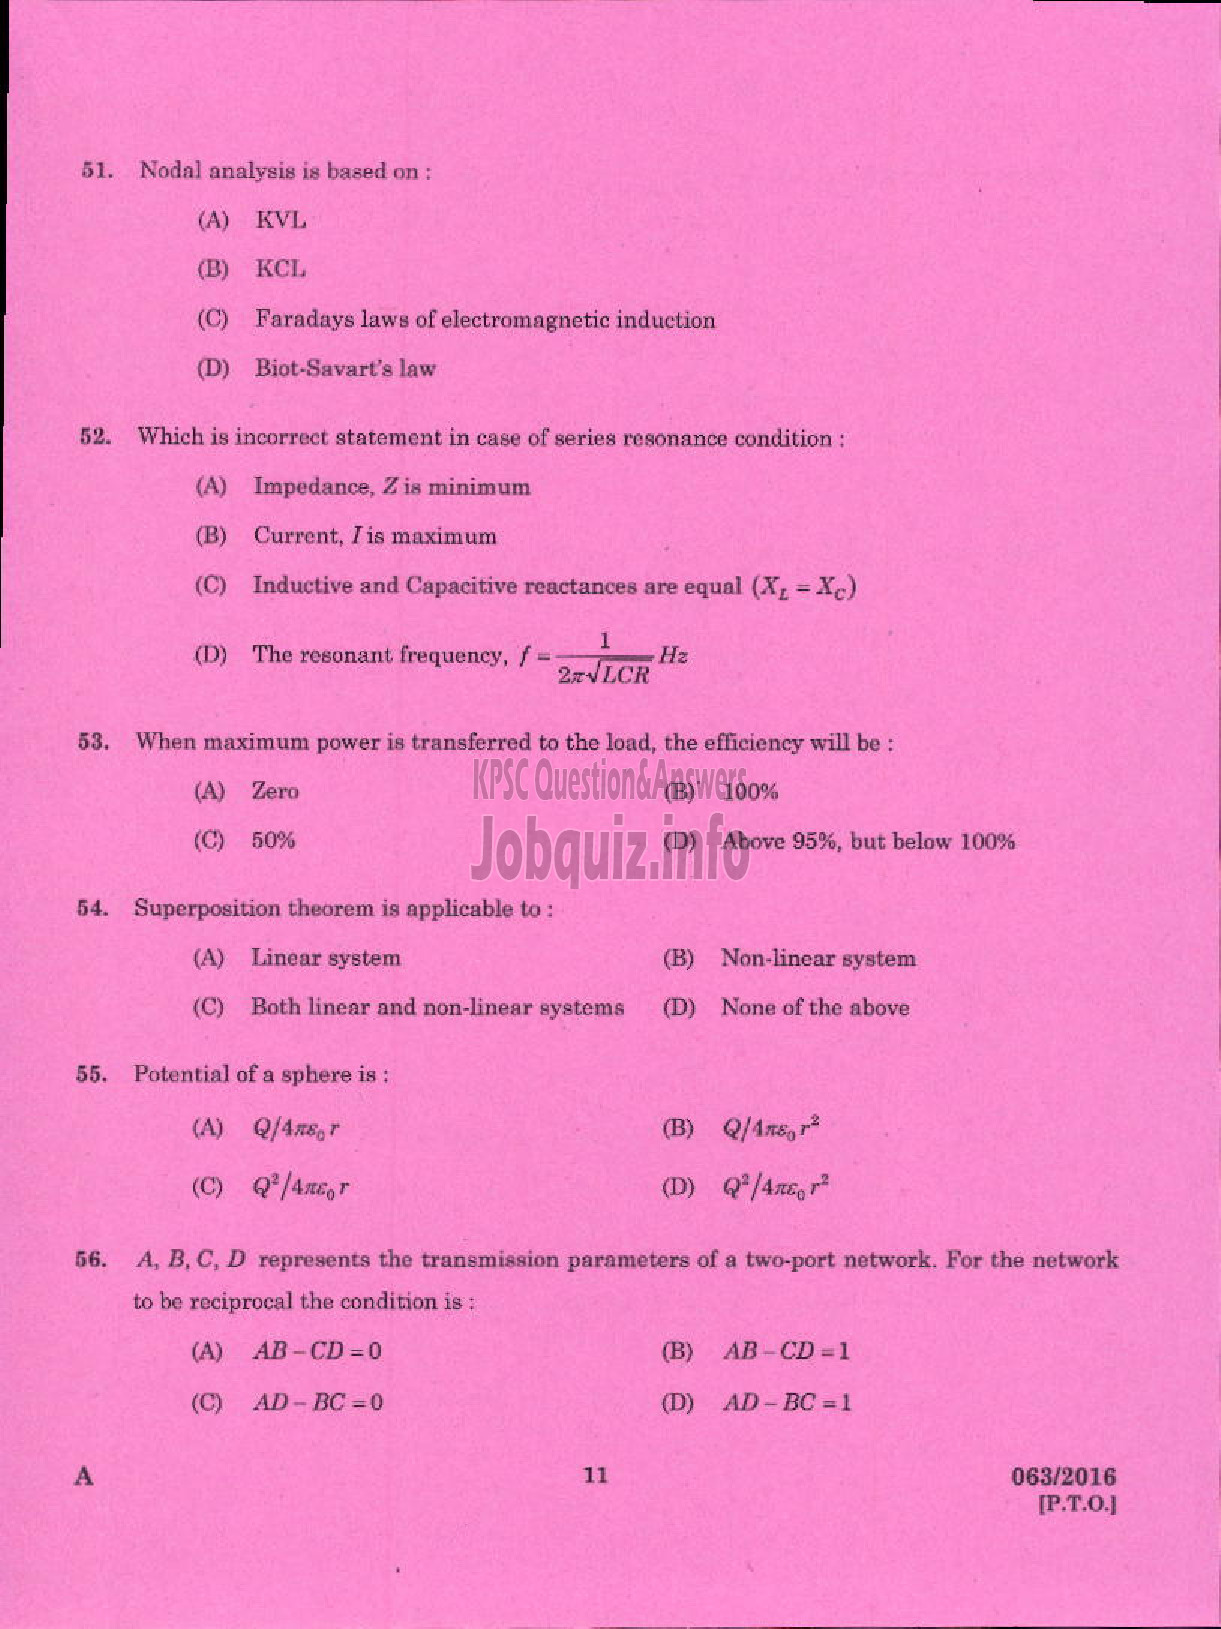 Kerala PSC Question Paper - ASSISTANT PROFESSOR IN ELECTRICAL AND ELECTRONICS ENGINEERING TECHNICAL EDUCATION ENGINEERING COLLEGES-9